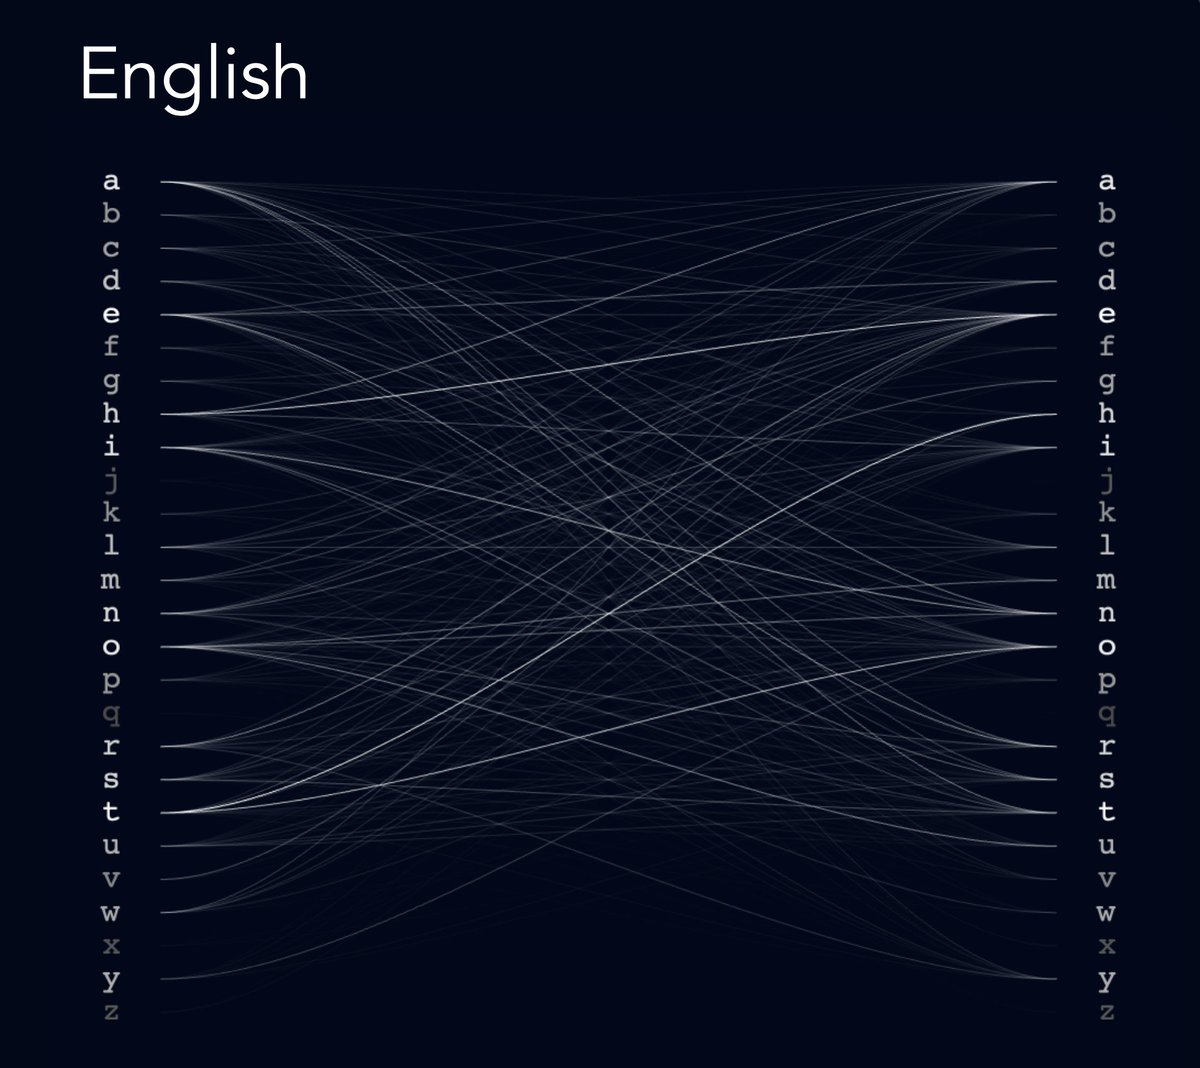 a simple way to fingerprint a language- take a bunch of text in the language, and every time one character occurs after another, connect them with a line from the left side to the right side here is English after 70 million characters